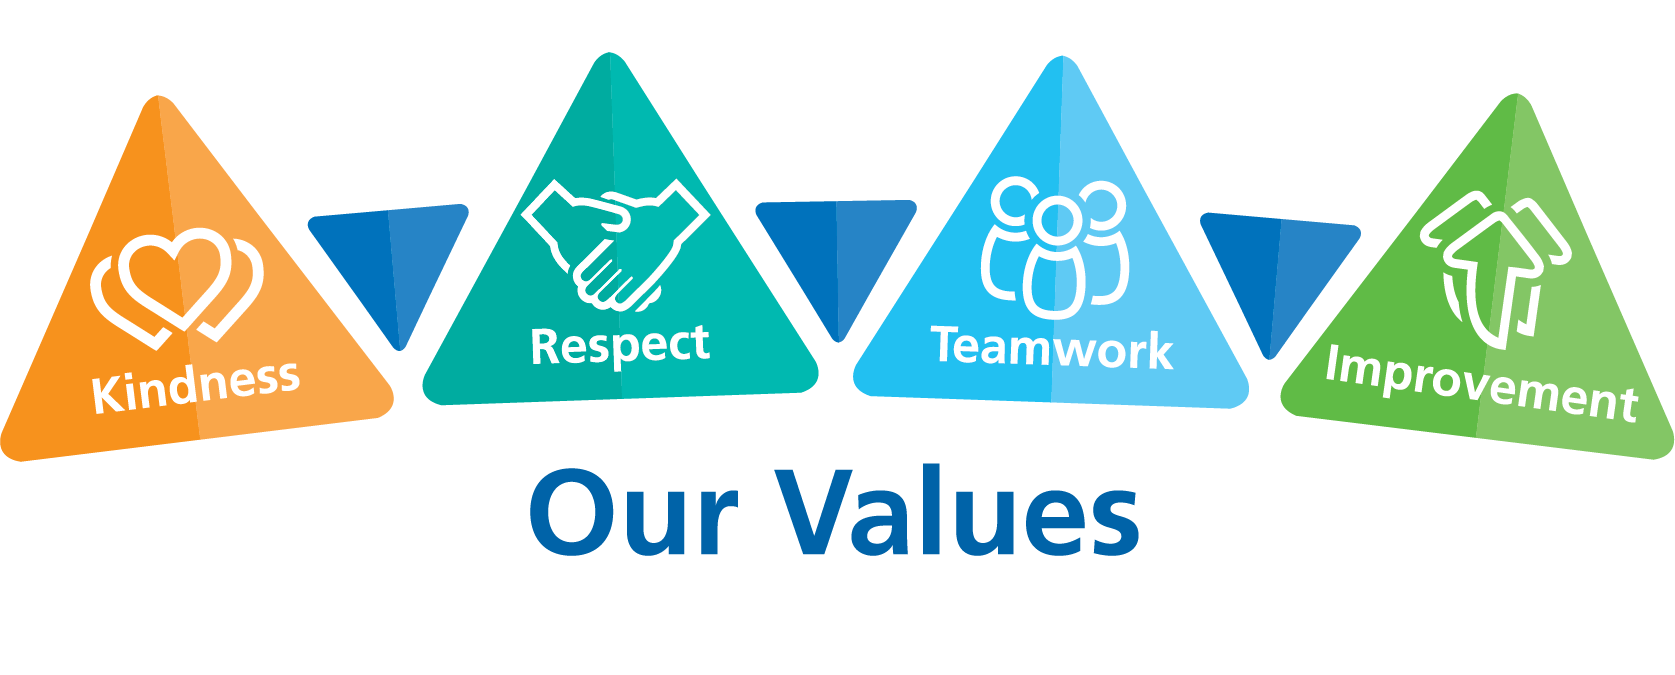 Our Vision and Values